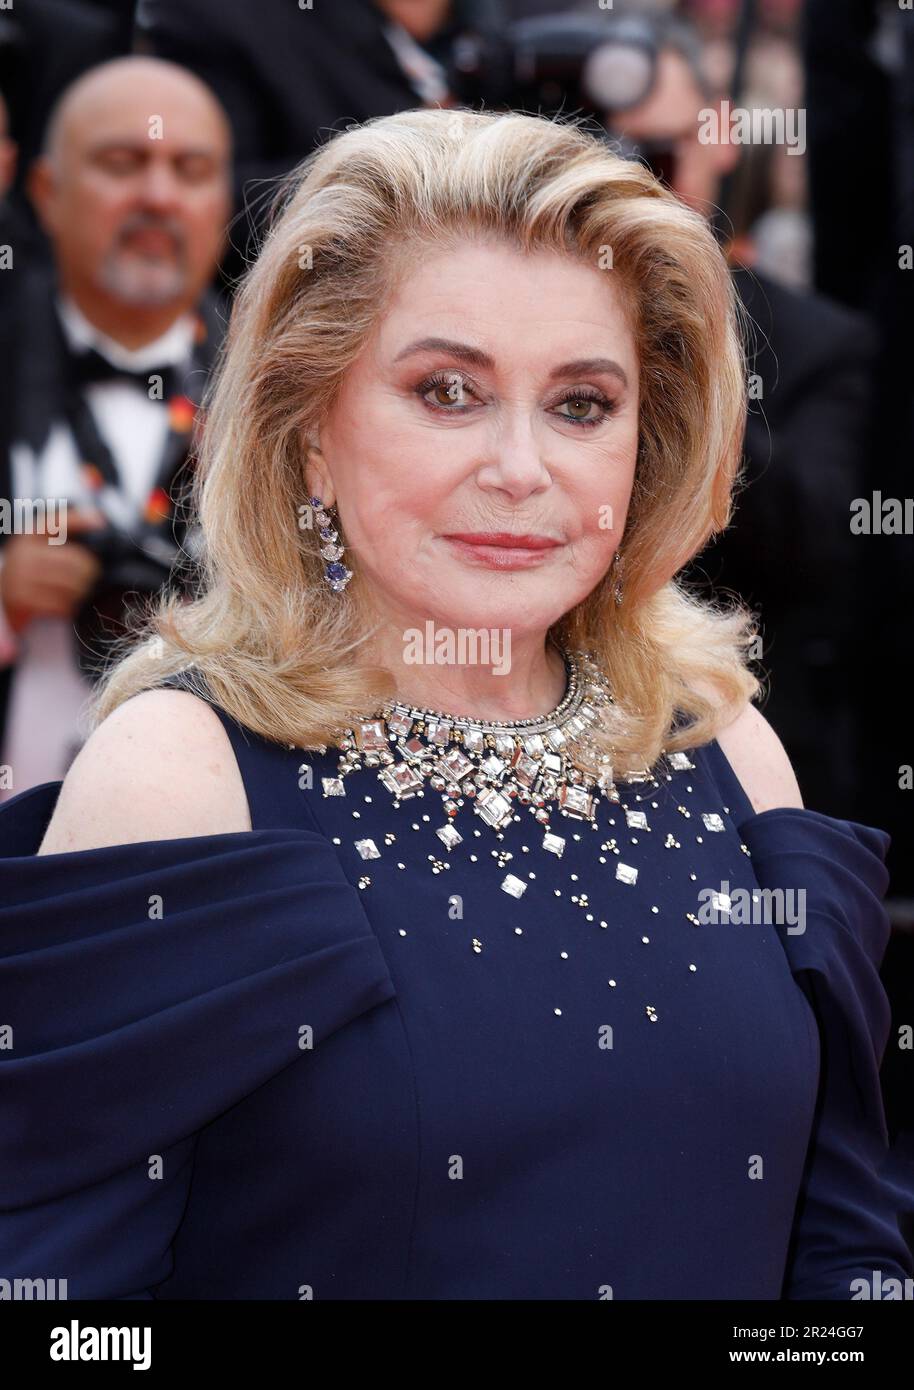 Catherine Deneuve attends the 'Jeanne du Barry' premiere and opening ceremony during the 76th annual Cannes Film Festival on May 16, 2023 in Cannes, France. Credit: DGP/imageSPACE/MediaPunch Stock Photo